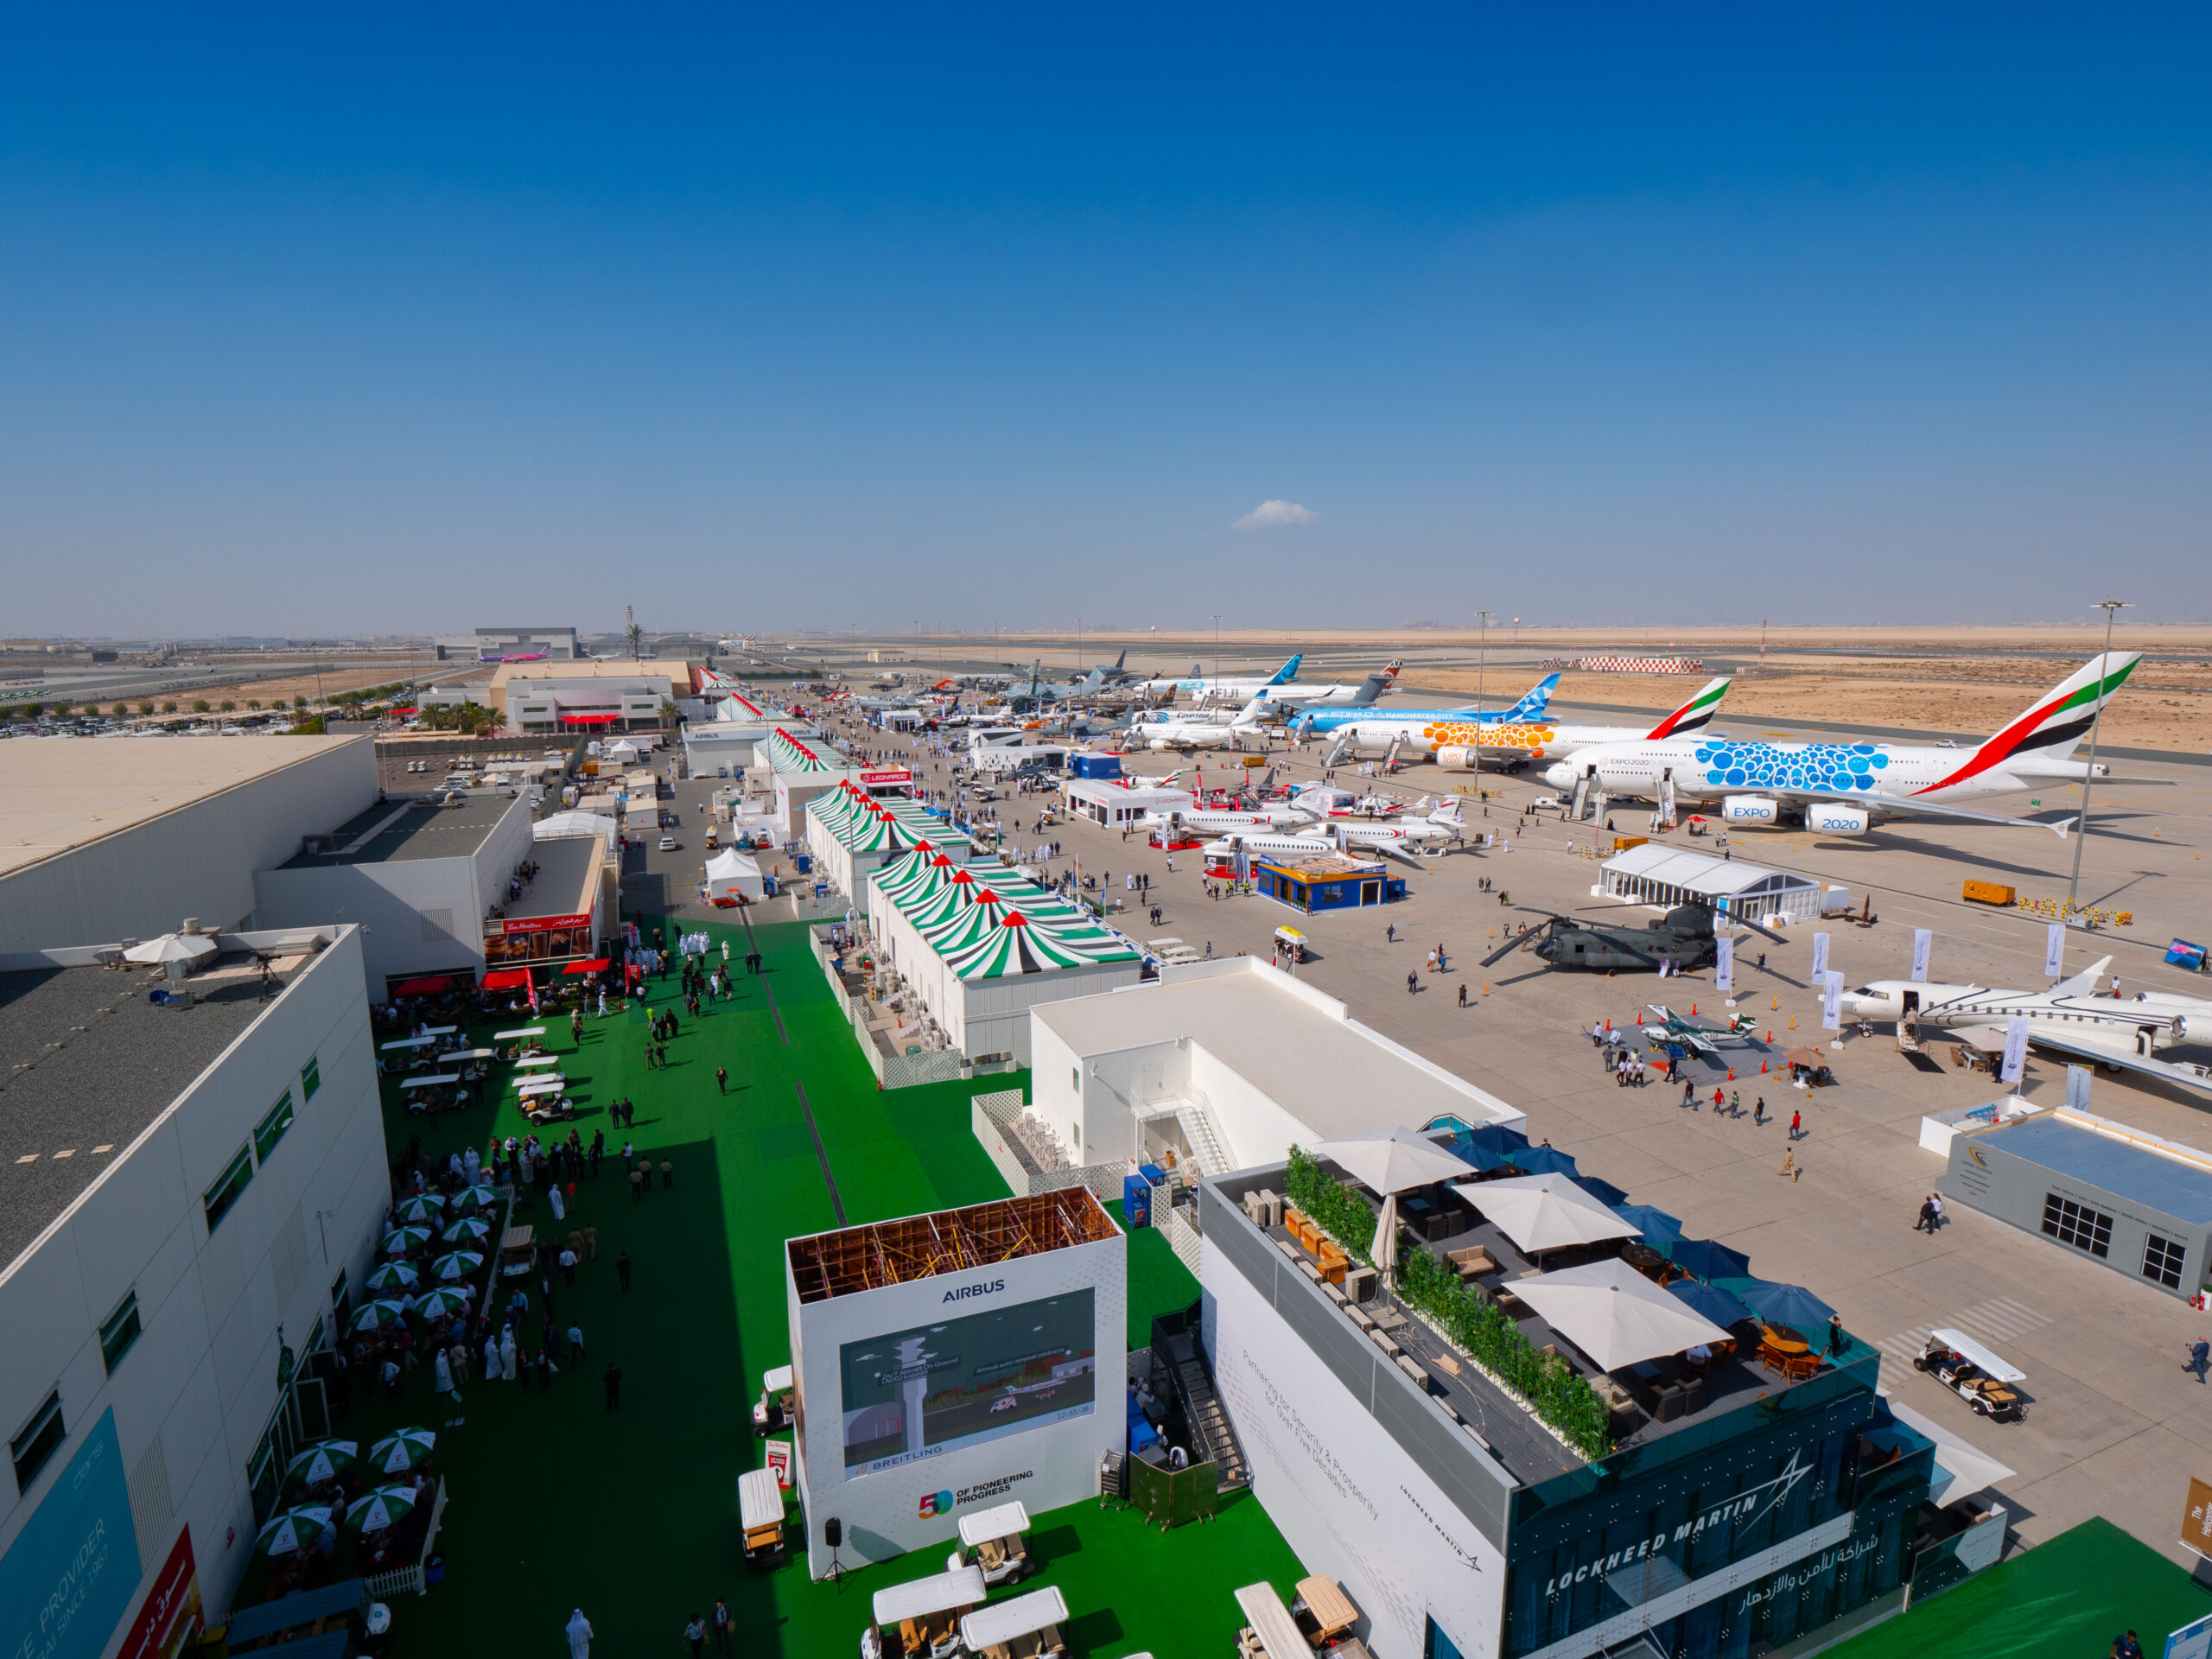 What to Expect at the Dubai Airshow 2021?